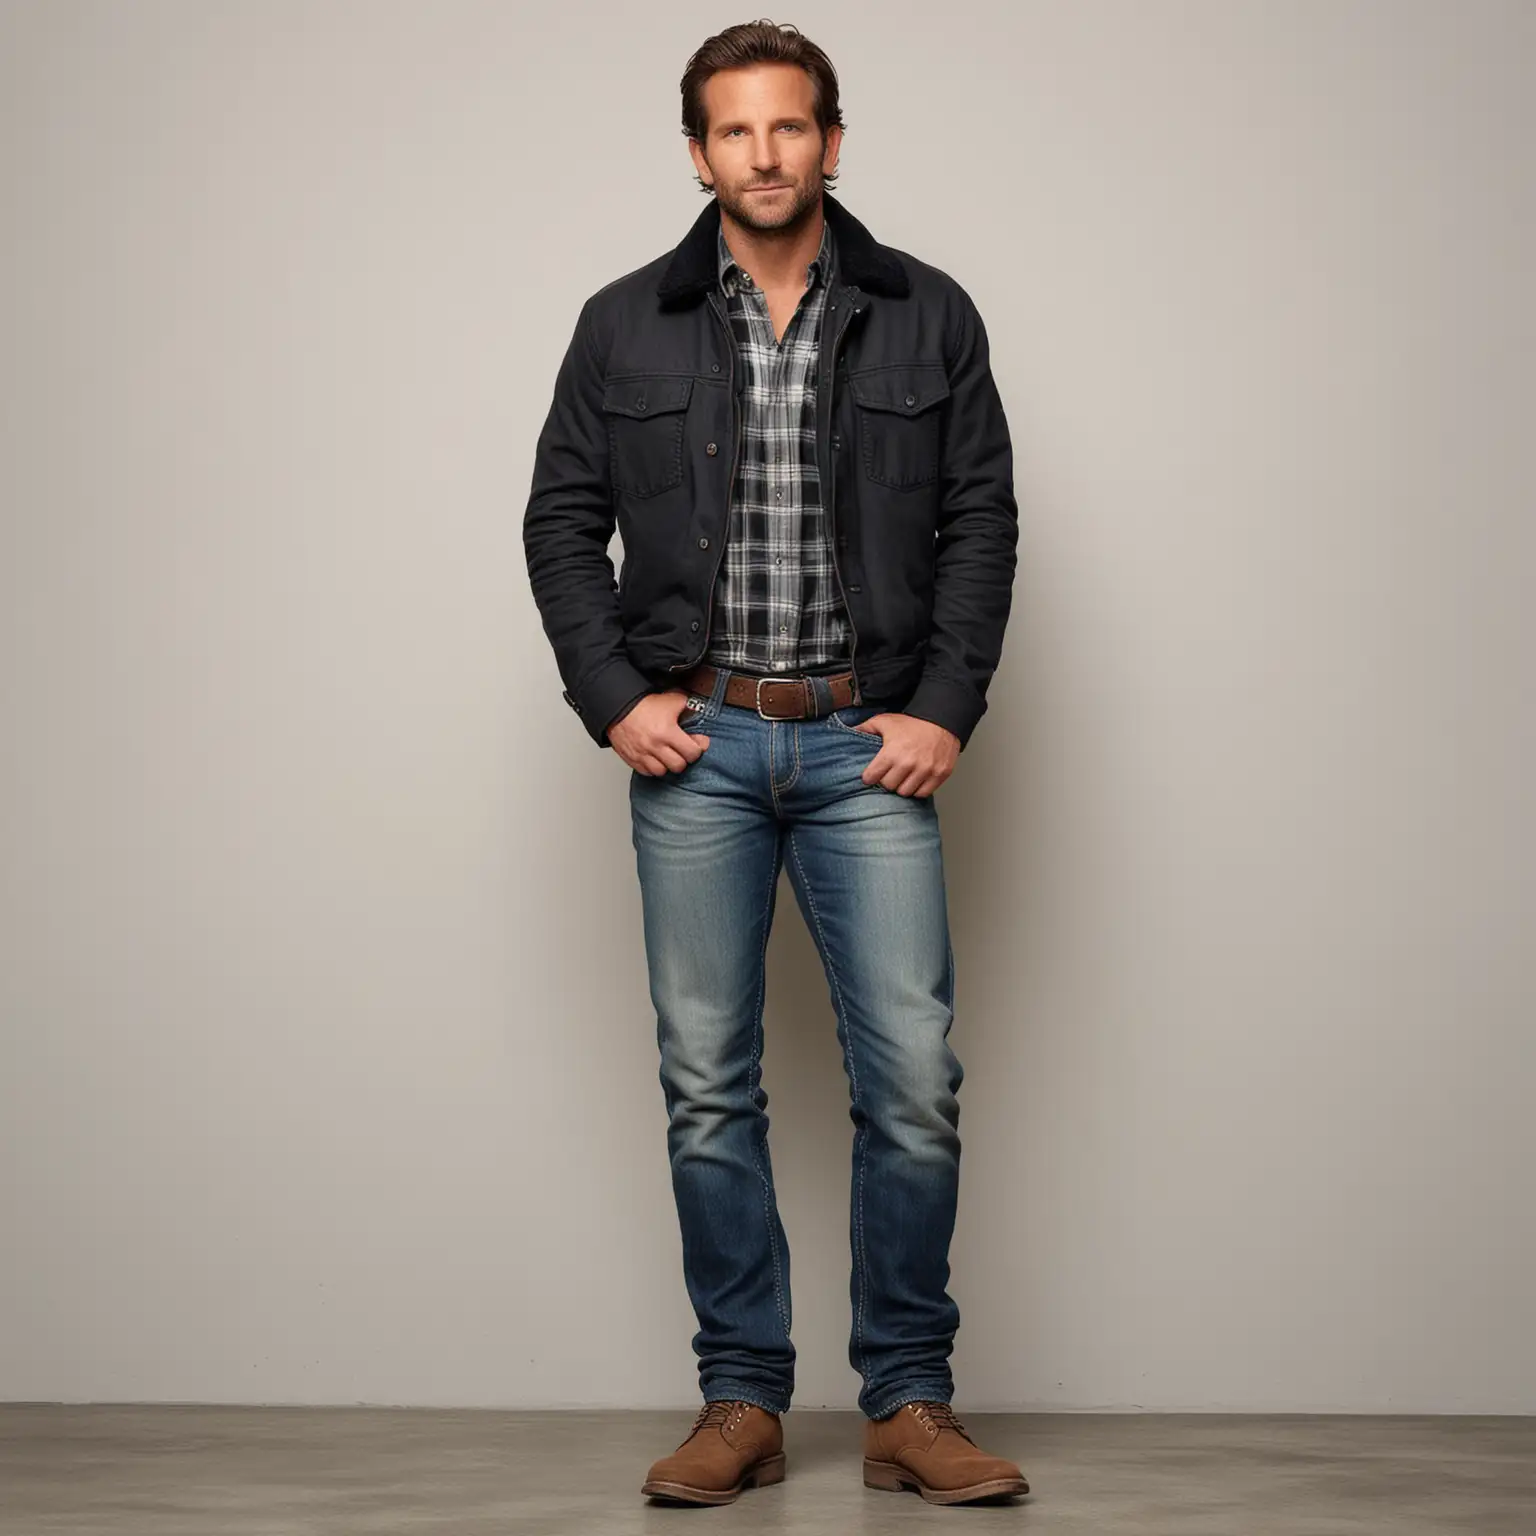 a man who looks like bradley cooper in black jacket and plaid shirt,  full- body image from side of him to lean back to white wall wearing jeans and boots, light grey background and has 
